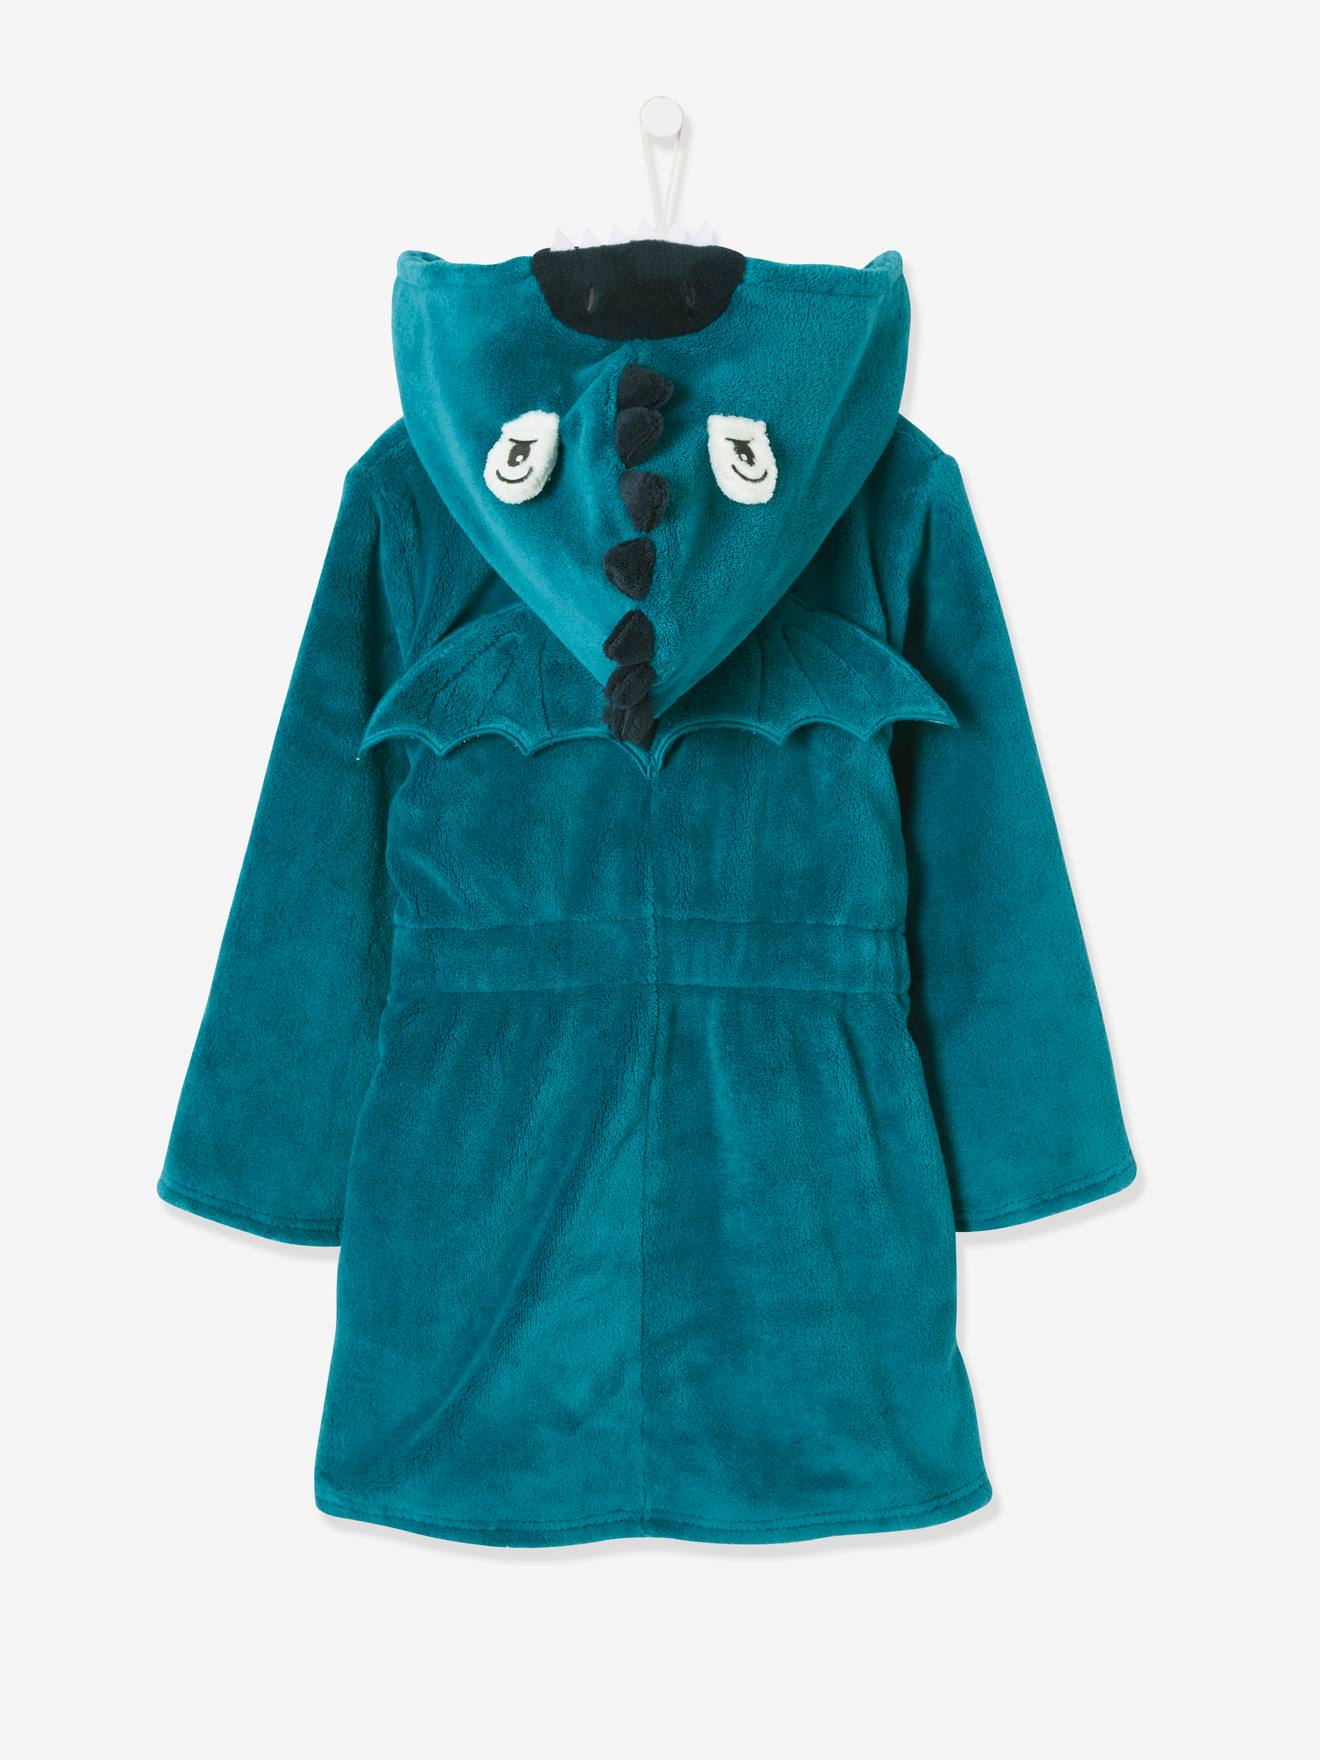 Boys and Girls Soft Touch Soft and Cuddly Hooded Robe/Dressing Gown 